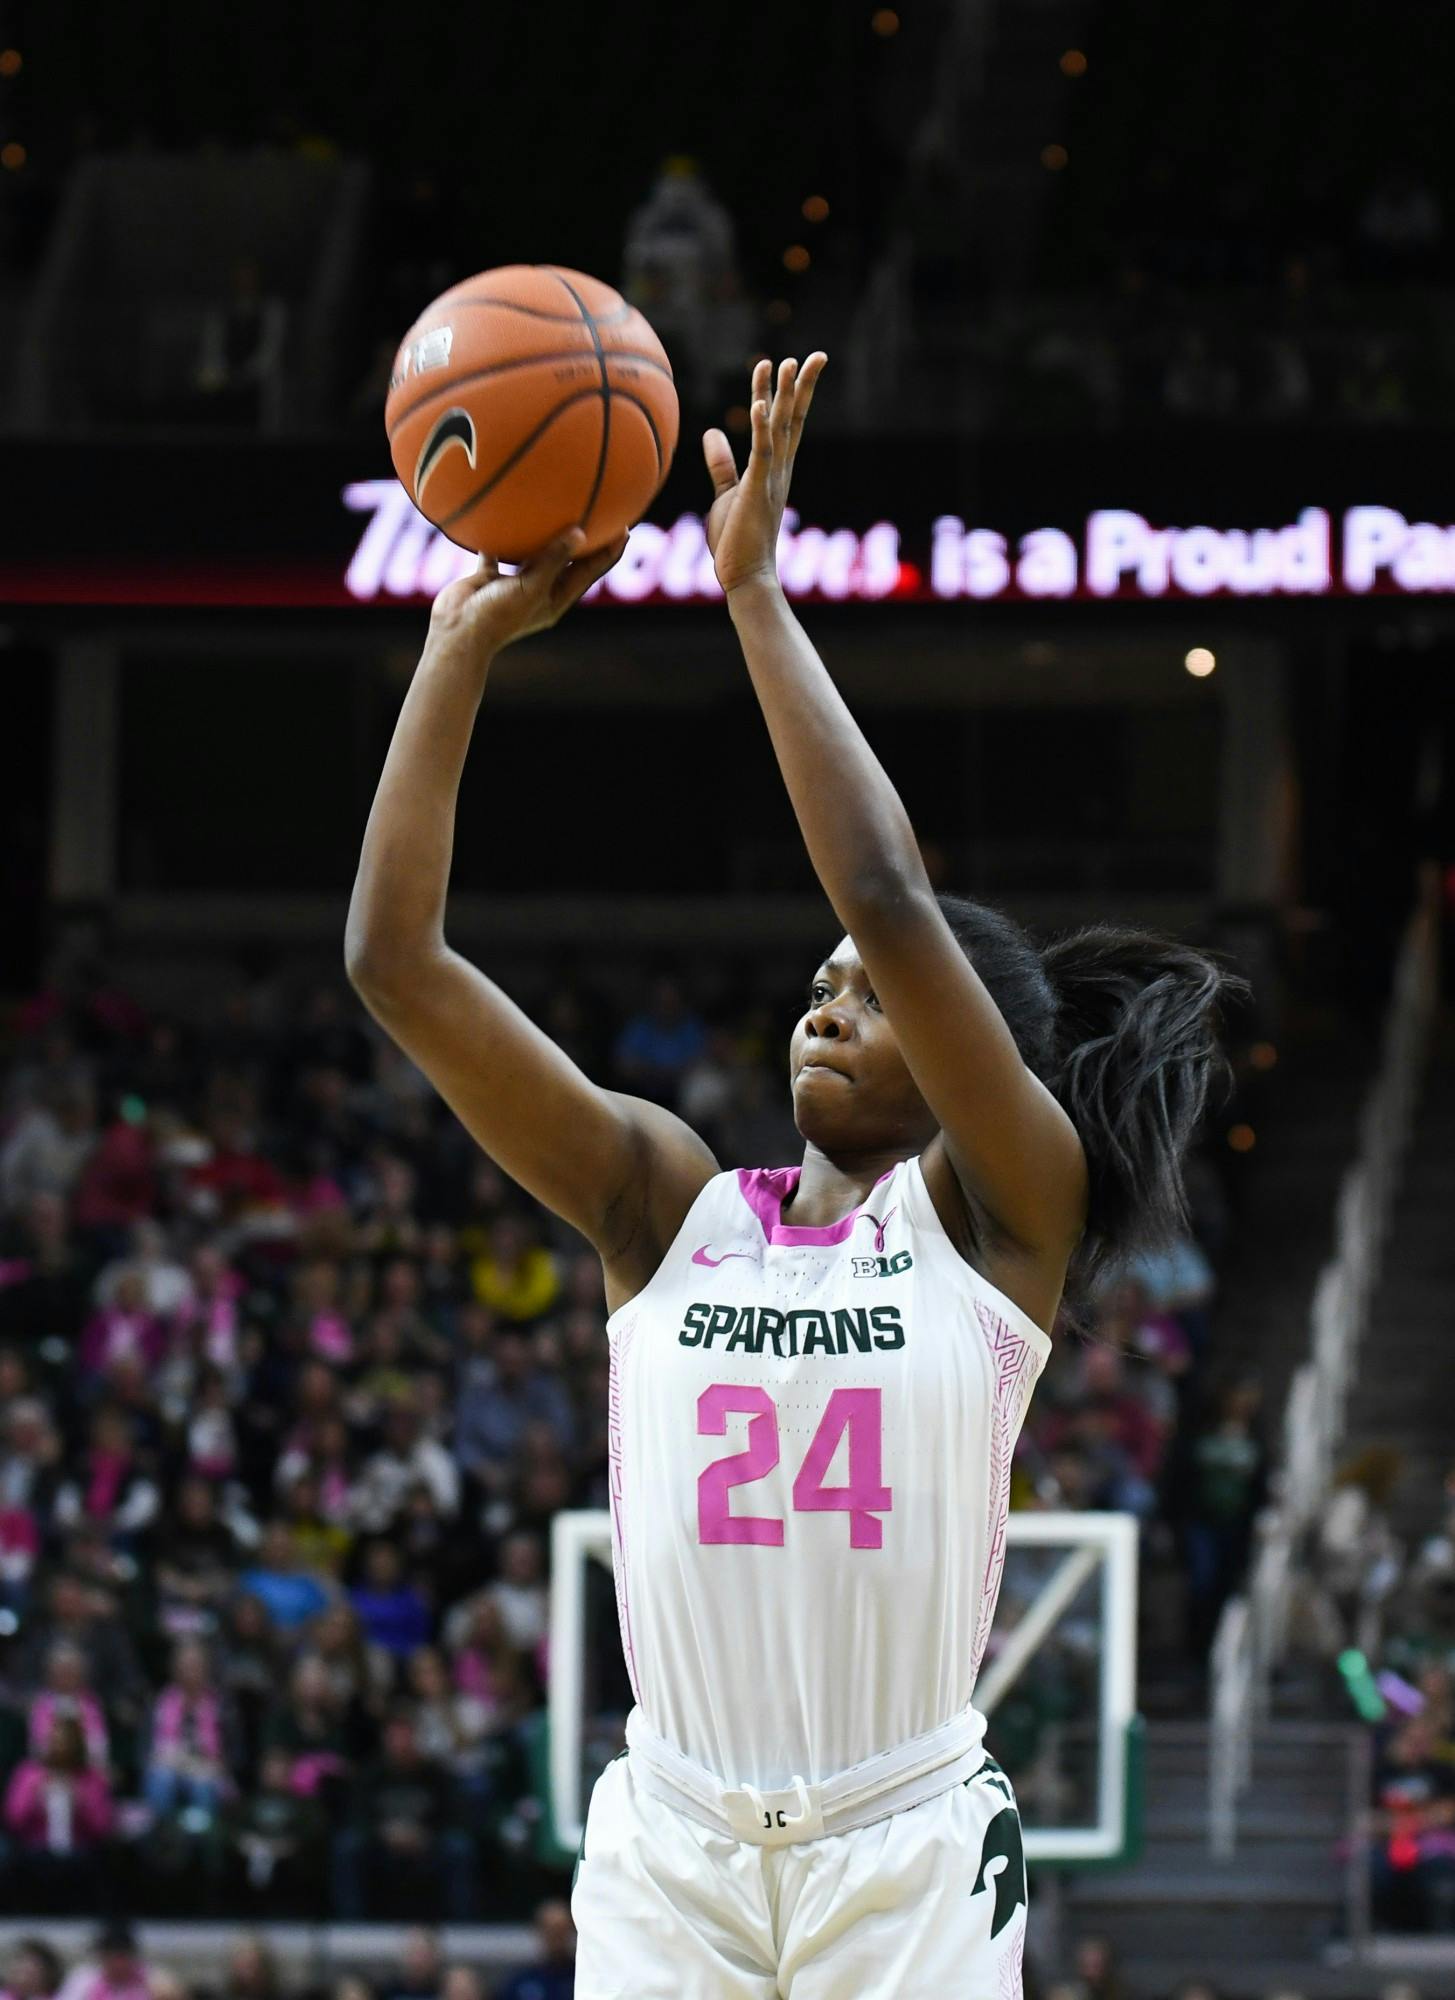 Sophomore guard Nia Clouden (24) takes a shot during the women's basketball game against Michigan at the Breslin Center on February 23, 2020. The Spartans fell to the Wolverines 65-57. 